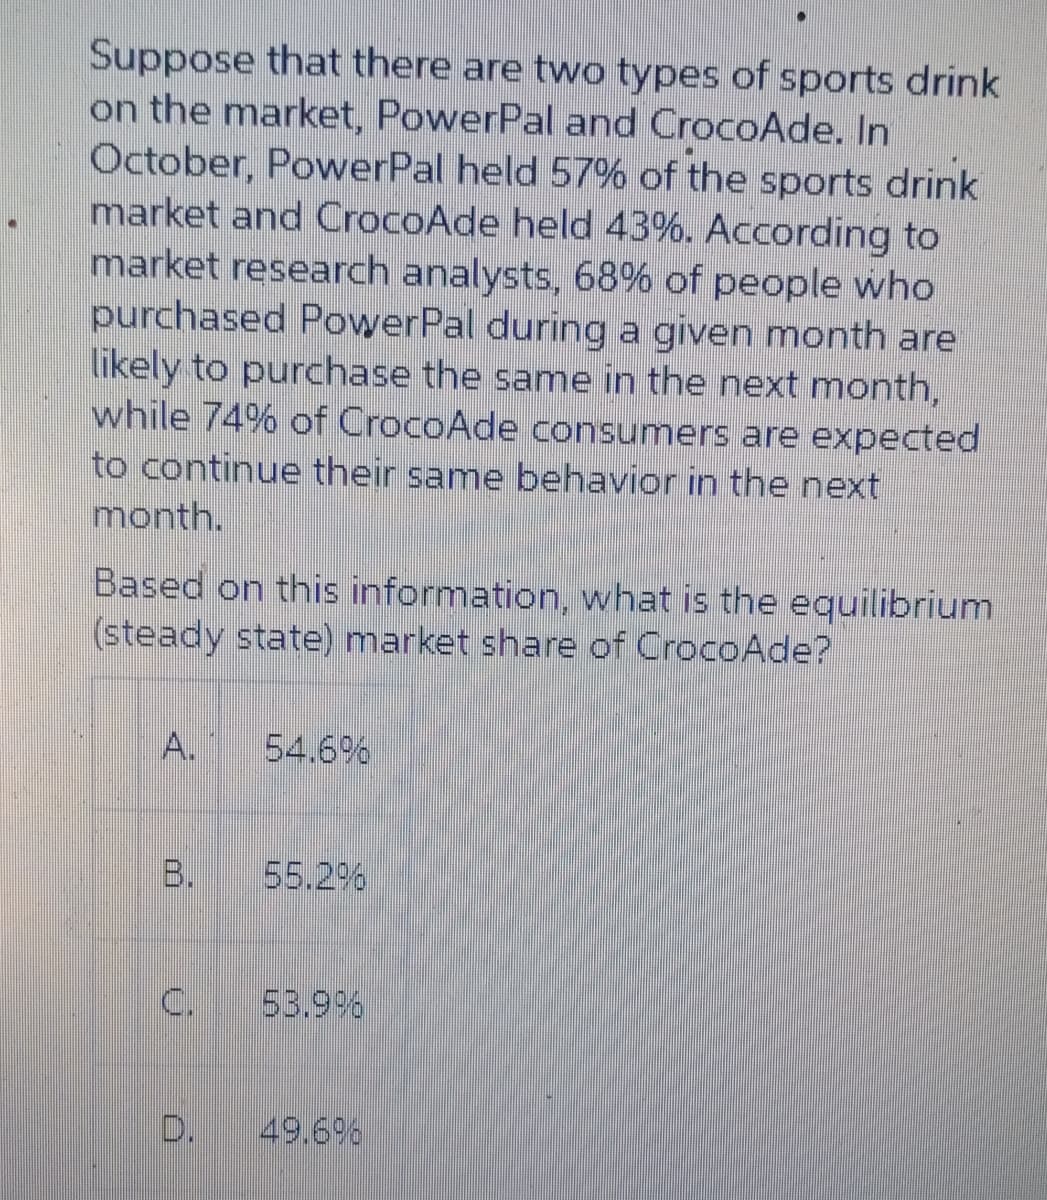 Suppose that there are two types of sports drink
on the market, PowerPal and CrocoAde. In
October, PowerPal held 57% of the sports drink
market and CrocoAde held 43%. According to
market research analysts, 68% of people who
purchased PowerPal during a given month are
likely to purchase the same in the next month,
while 74% of CrocoAde consumers are expected
to continue their same behavior in the next
month.
Based on this information, what is the equilibrium
(steady state) market share of CrocoAde?
54.6%
B.
55.2%
C.
53.9%
49.69%
A.
